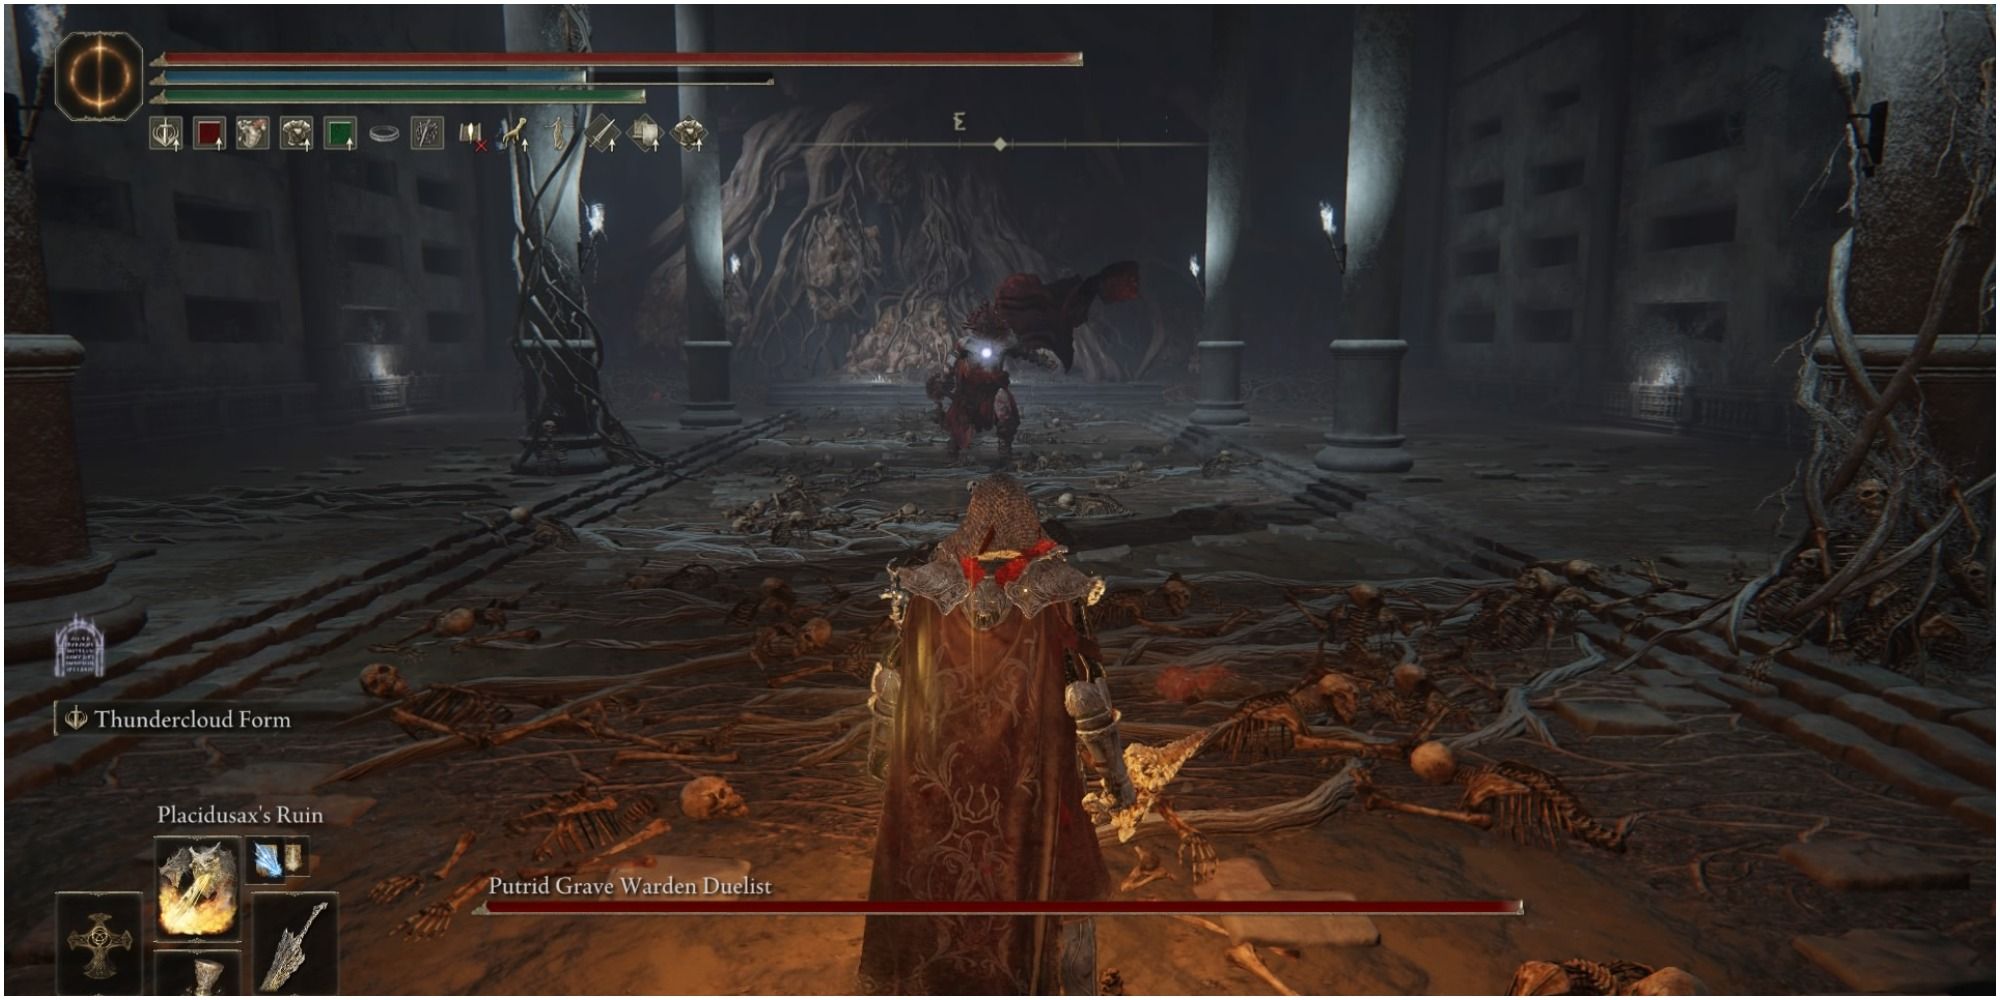 The player facing the boss of the catacombs.